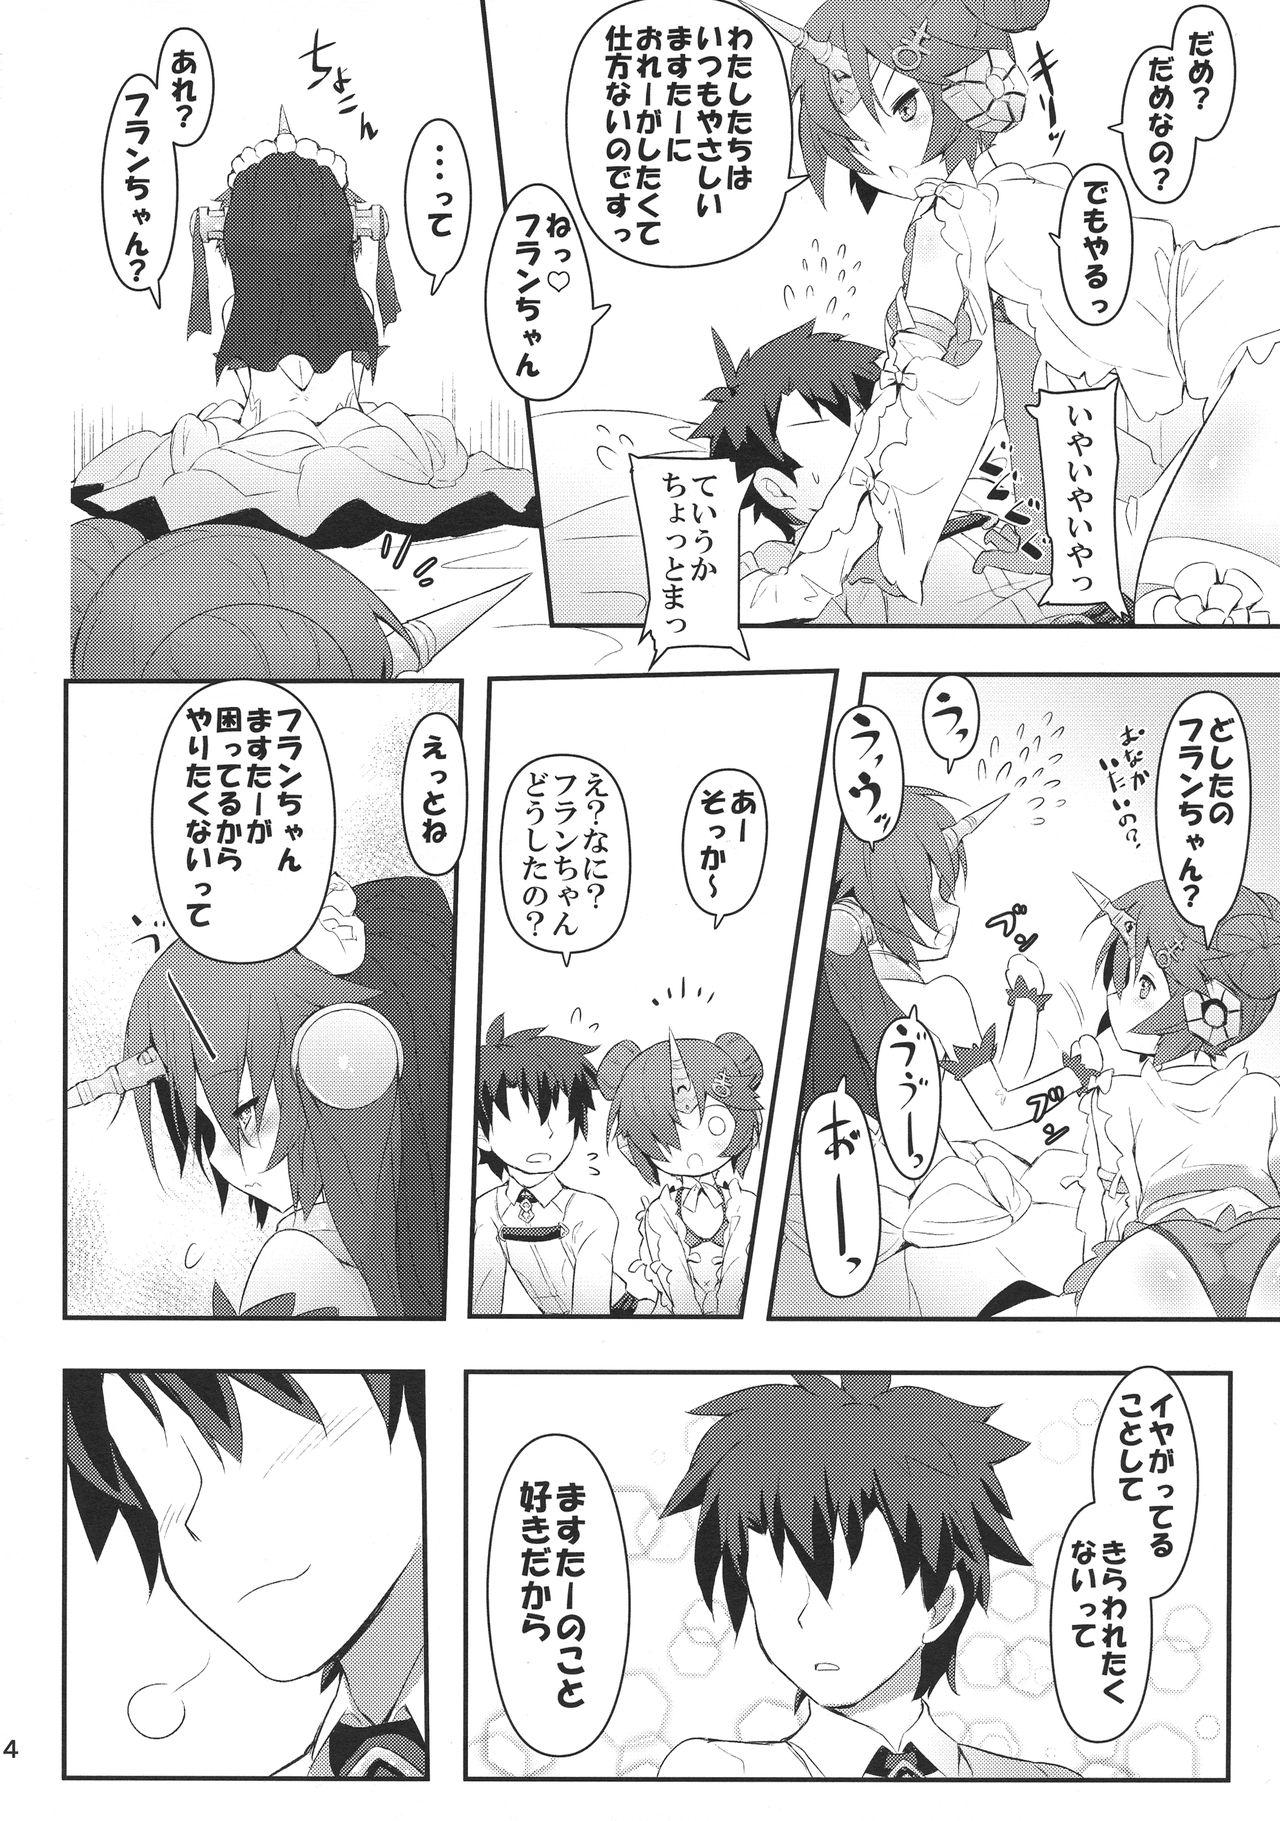 Stretching FRANKEN&STEIN - Fate grand order Topless - Page 5